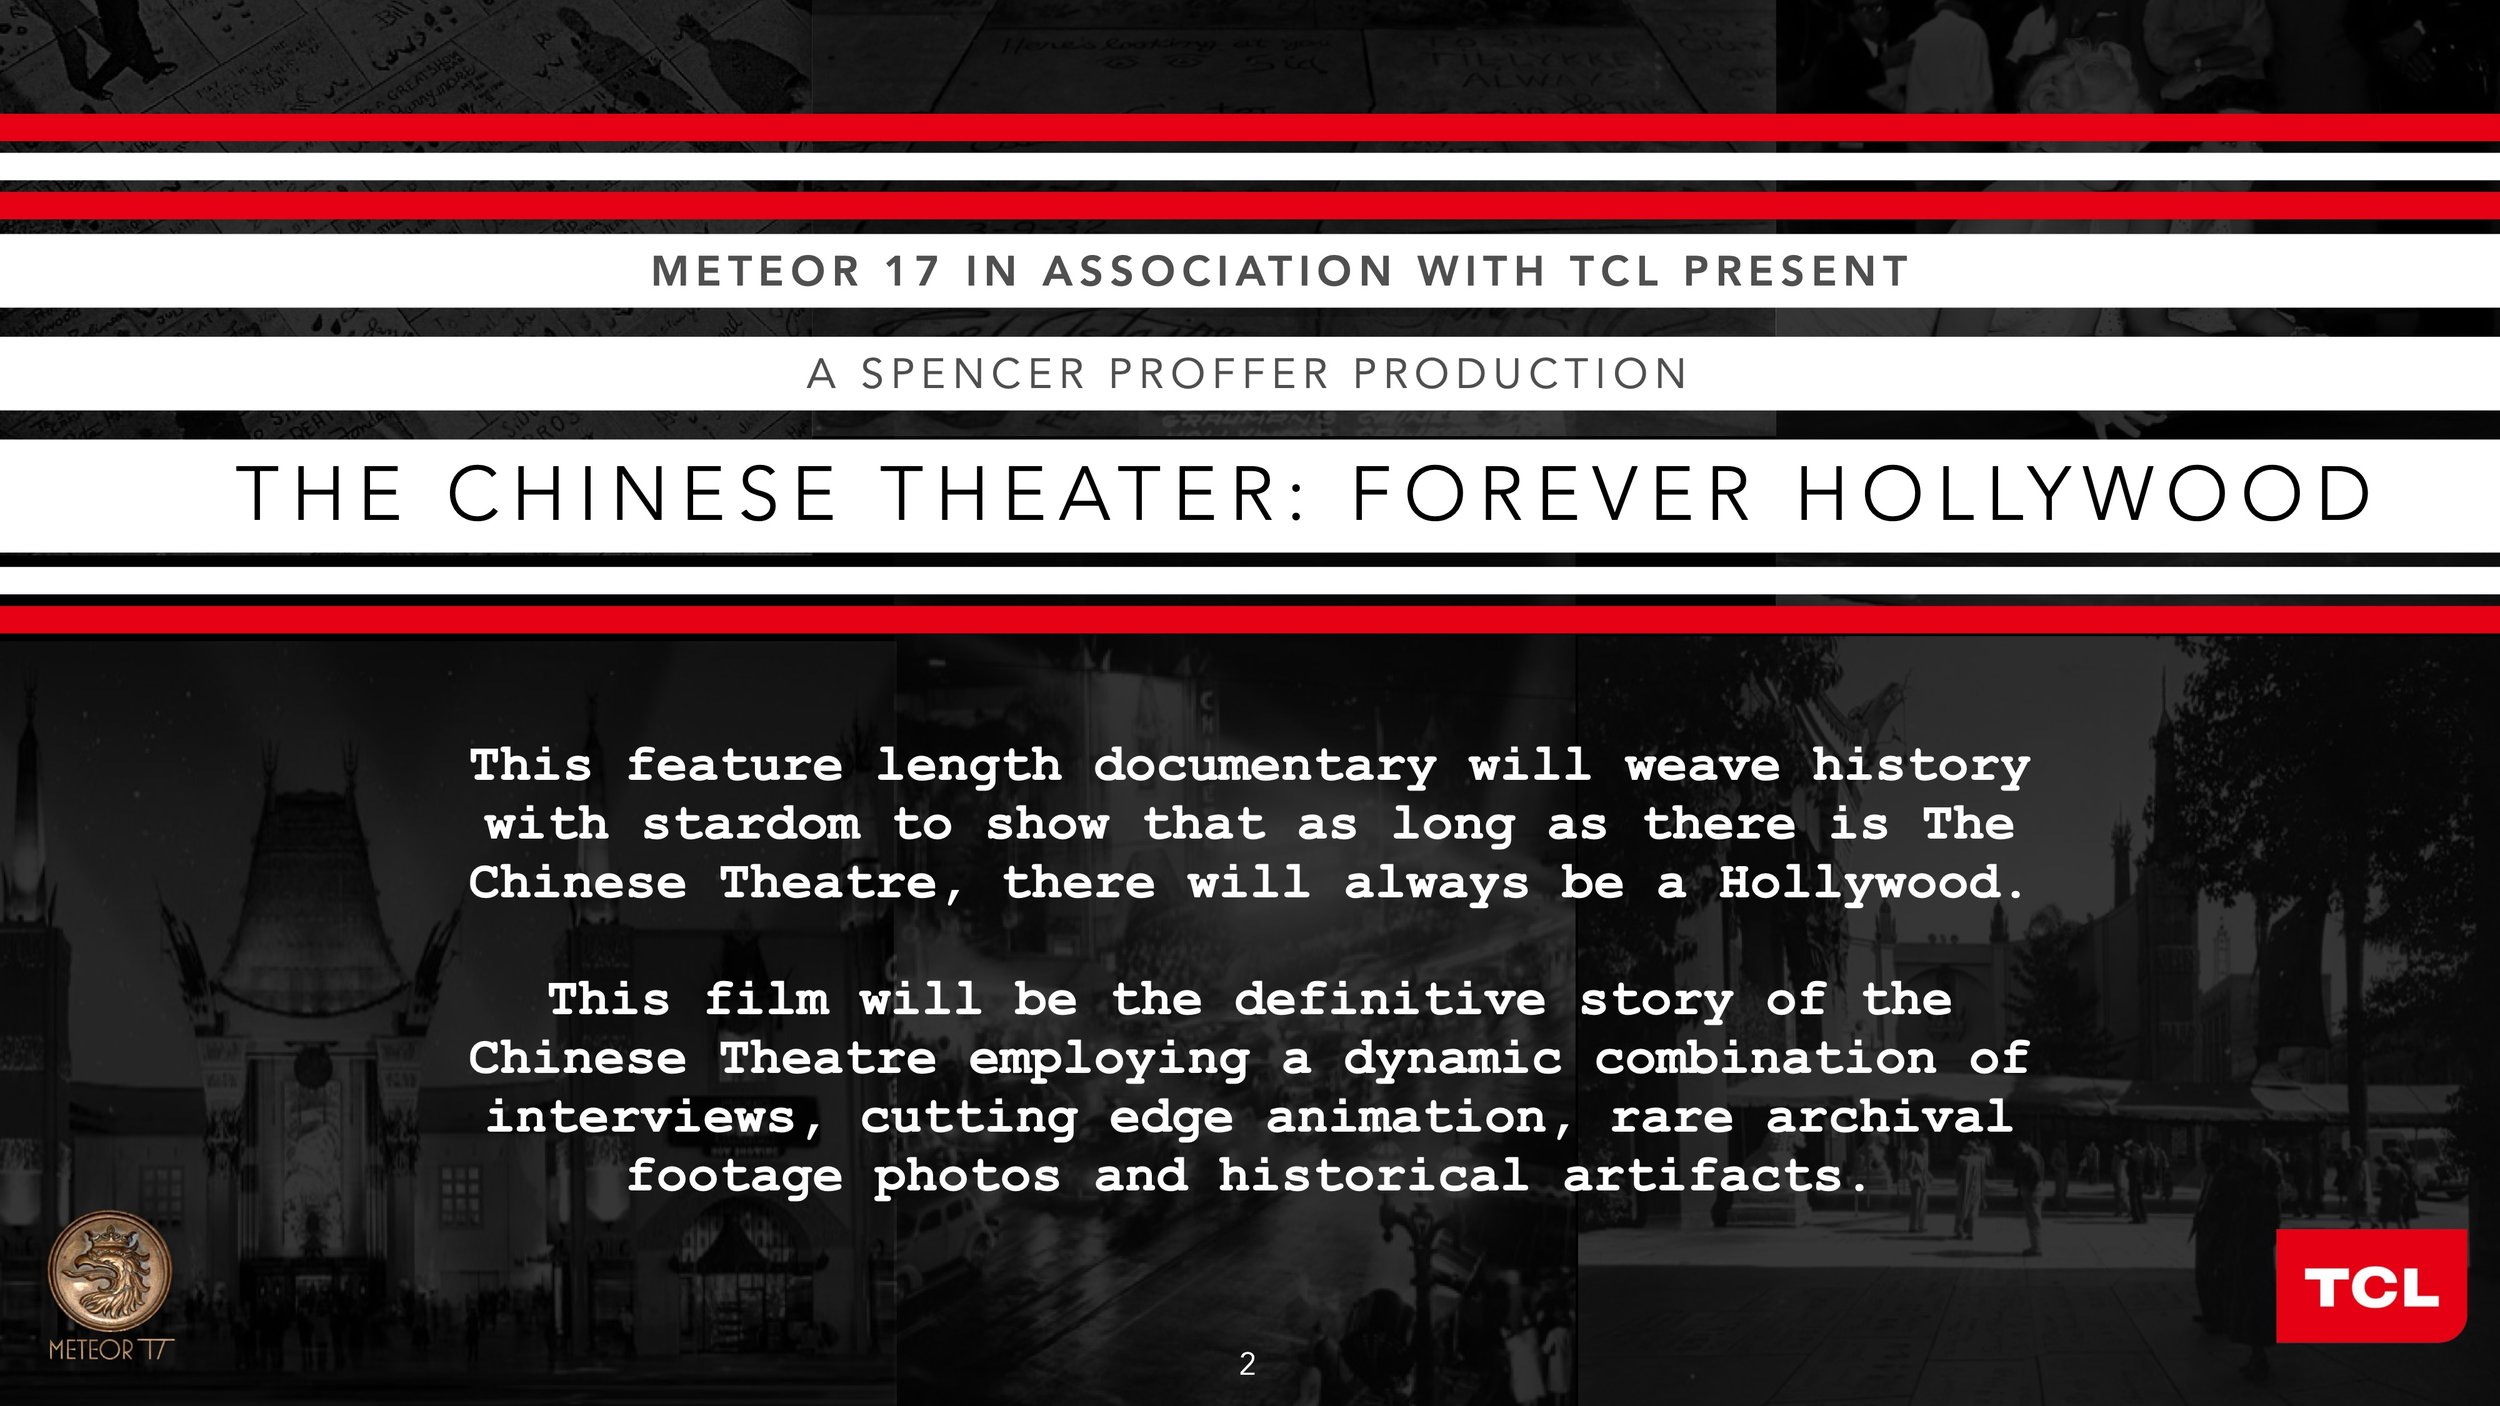 Chinese Theater Forever Hollywood v2+m 21JAN2019 2.jpeg